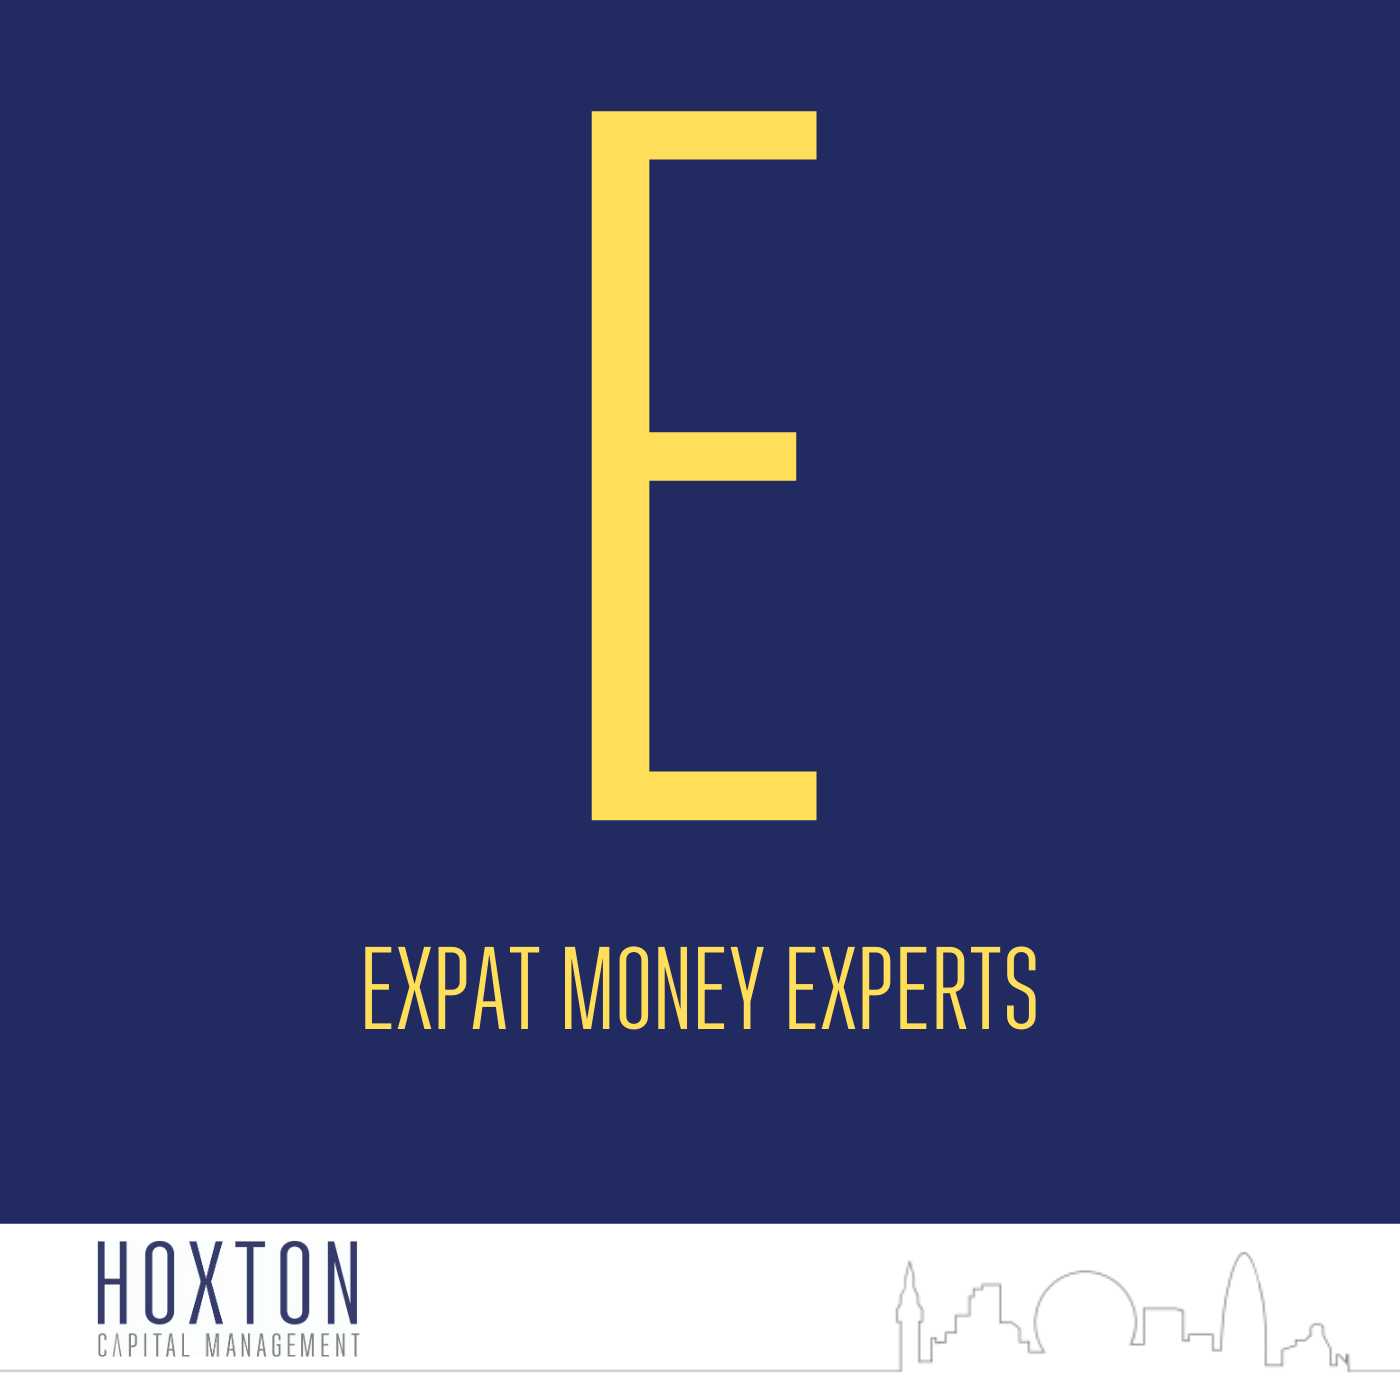 Episode 5 - Expat mortgages with Maria Fadeeva